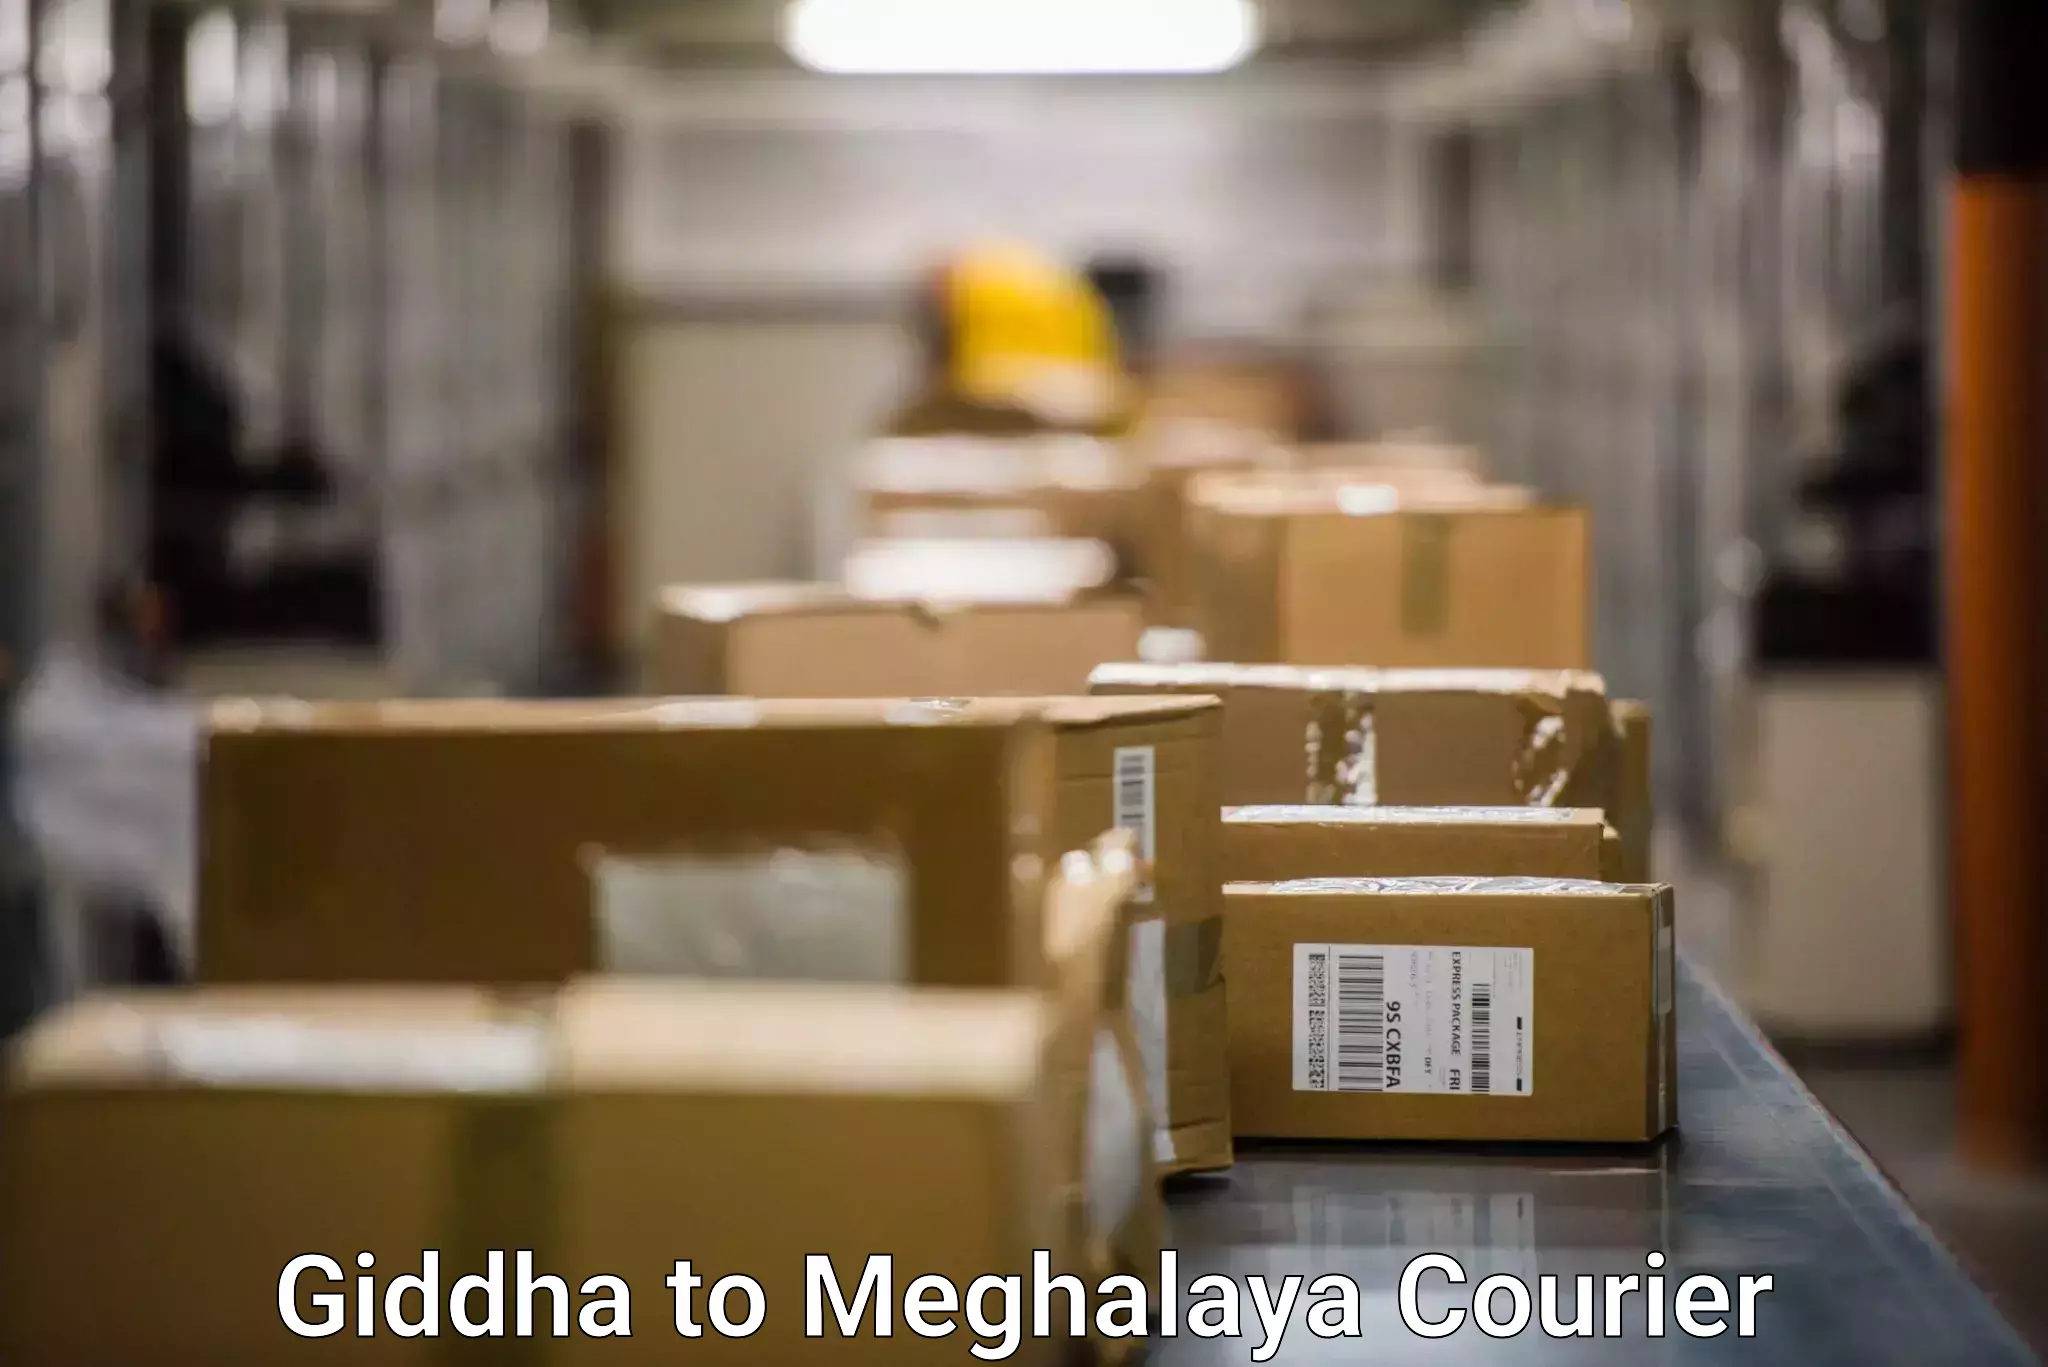 Automated parcel services Giddha to Shillong